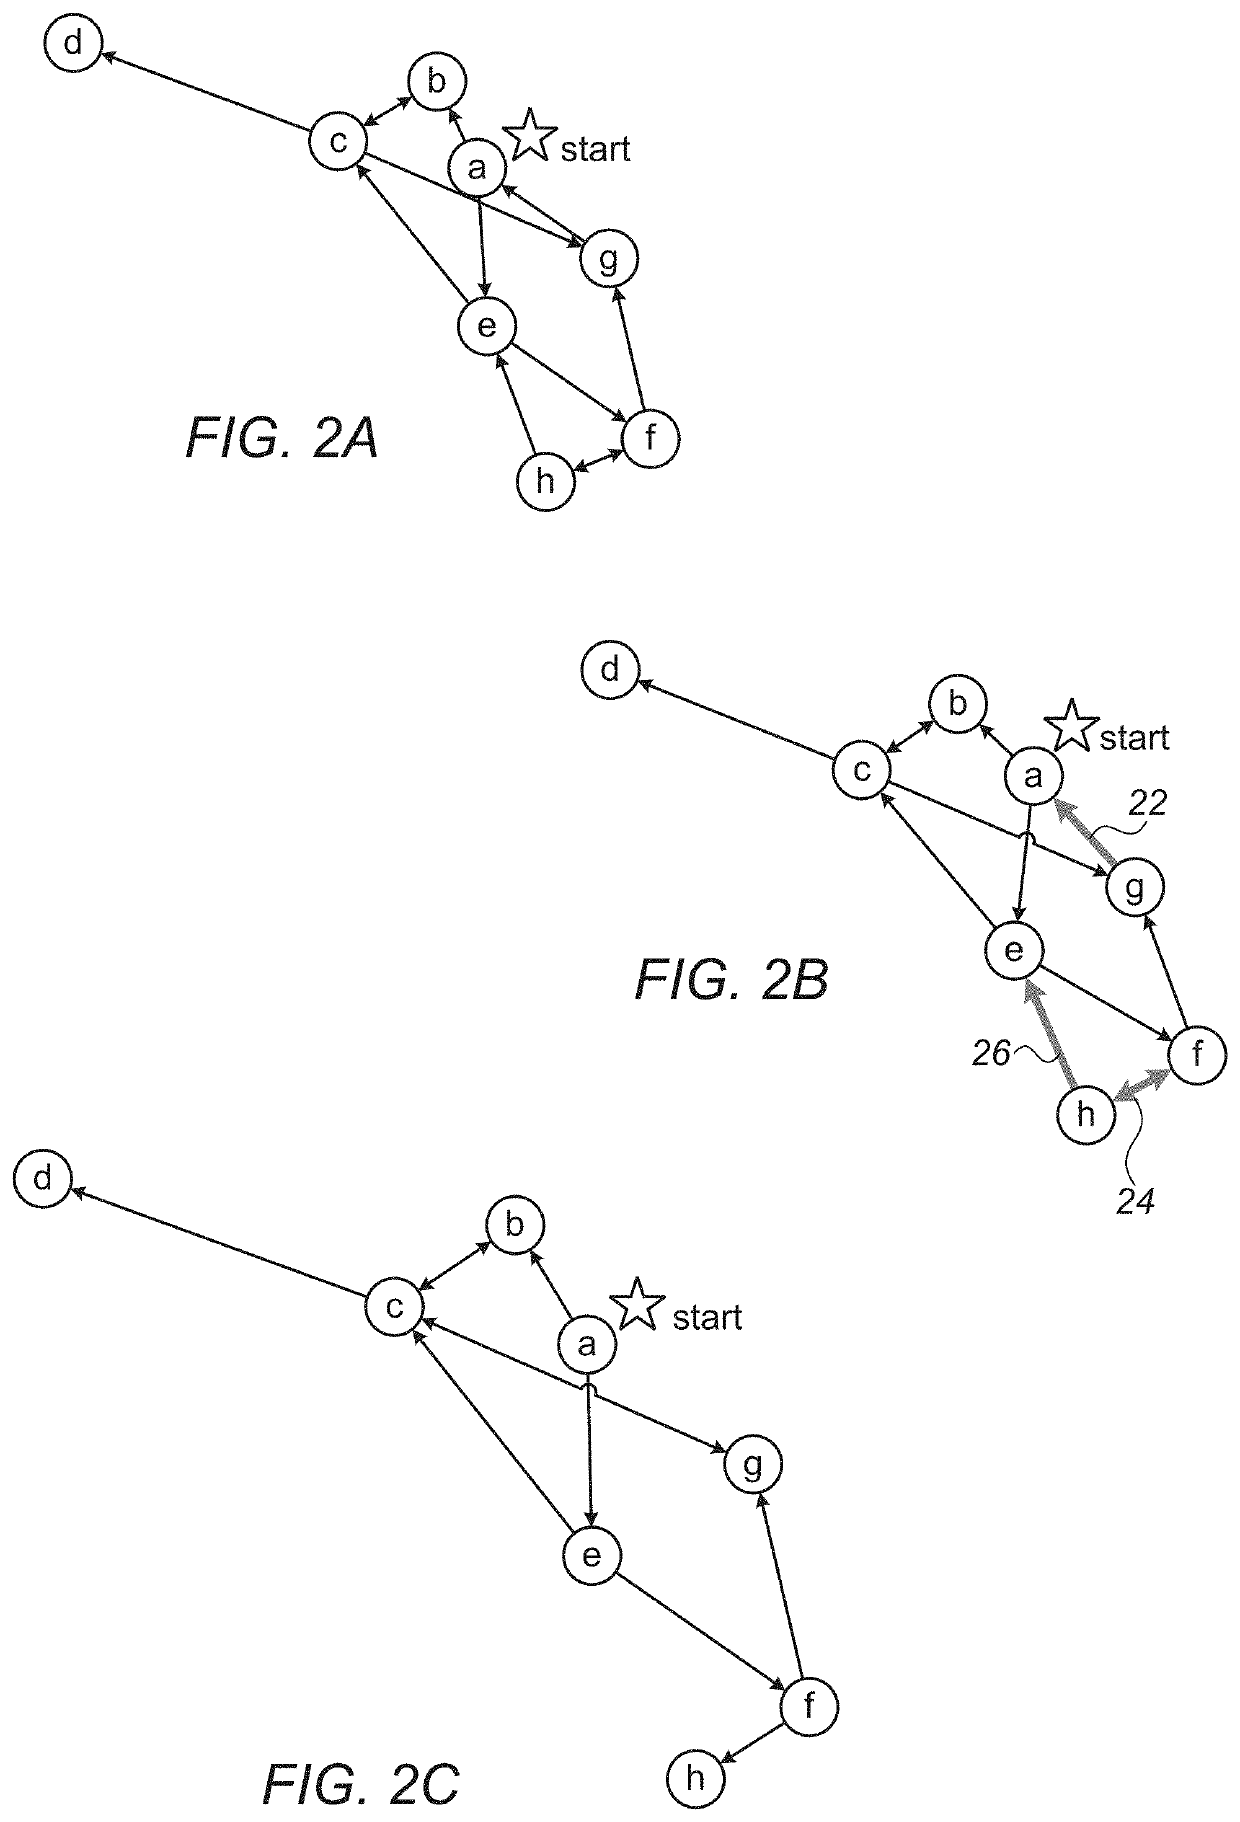 Operational Network Risk Mitigation System And Method